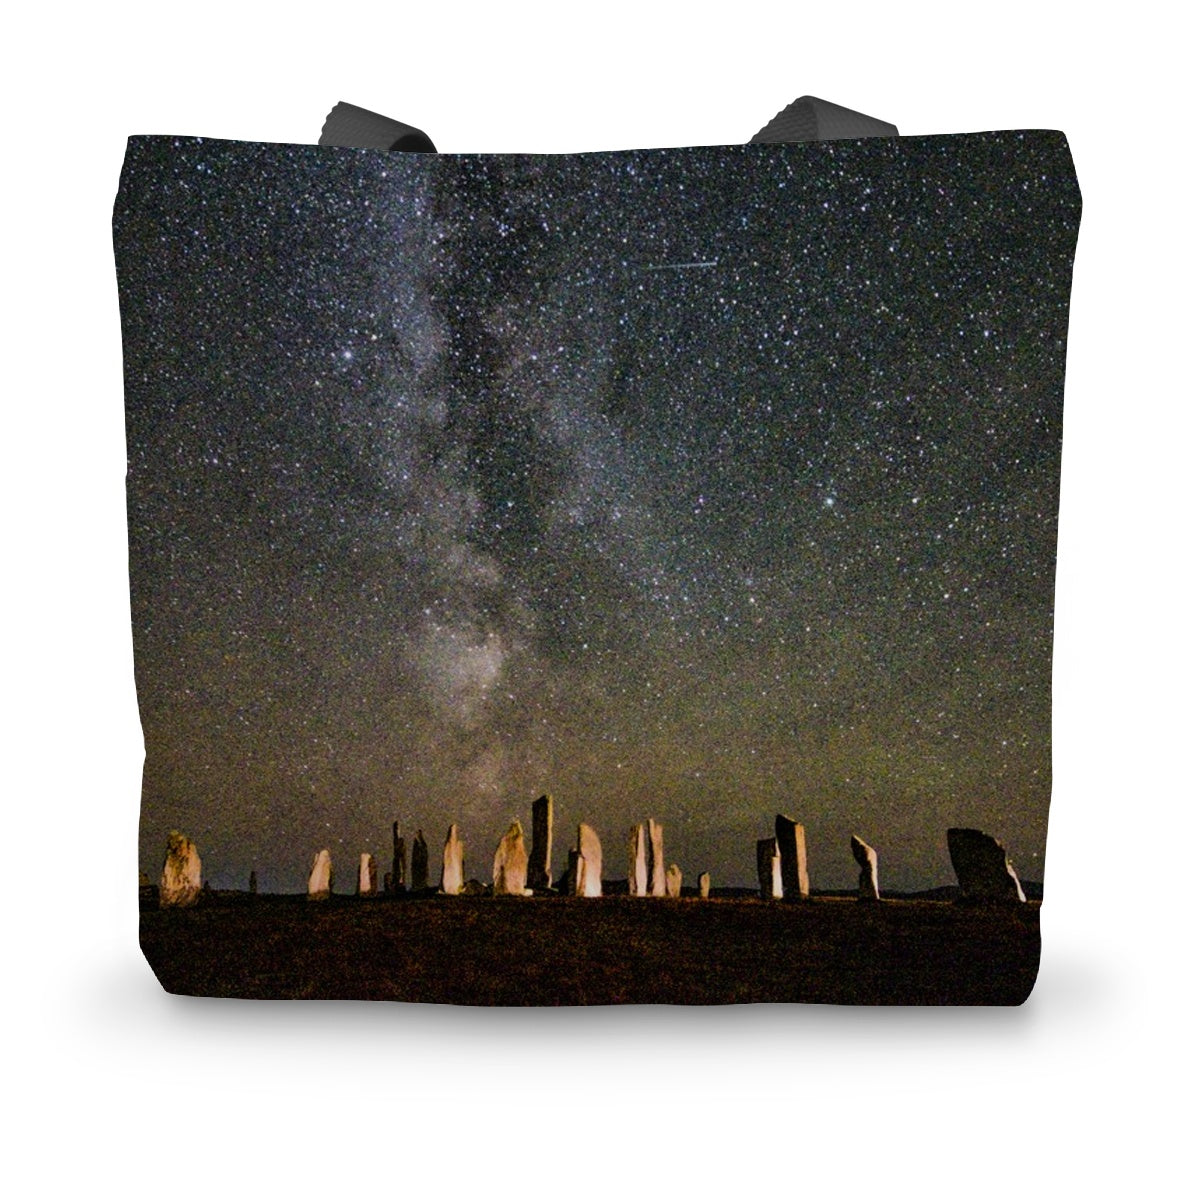 Callanish and the Milky Way  Canvas Tote Bag